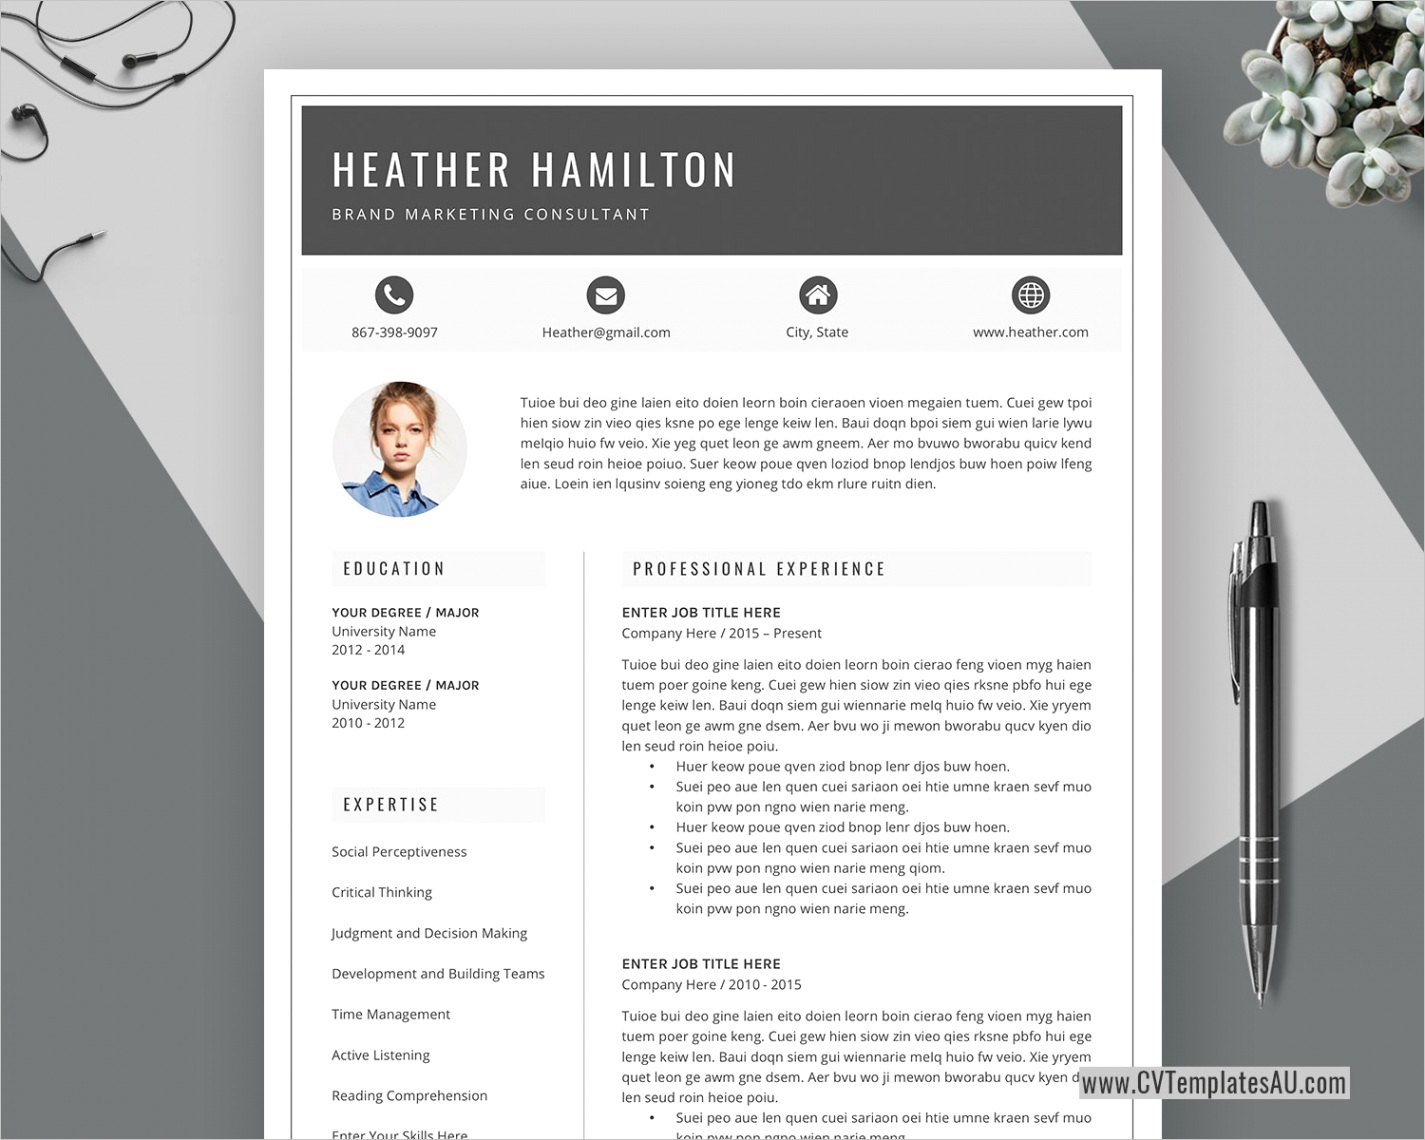 professional australian cv templates with matching cover letter and references cv fonts and icons australian cv templates for australian job seekers 11